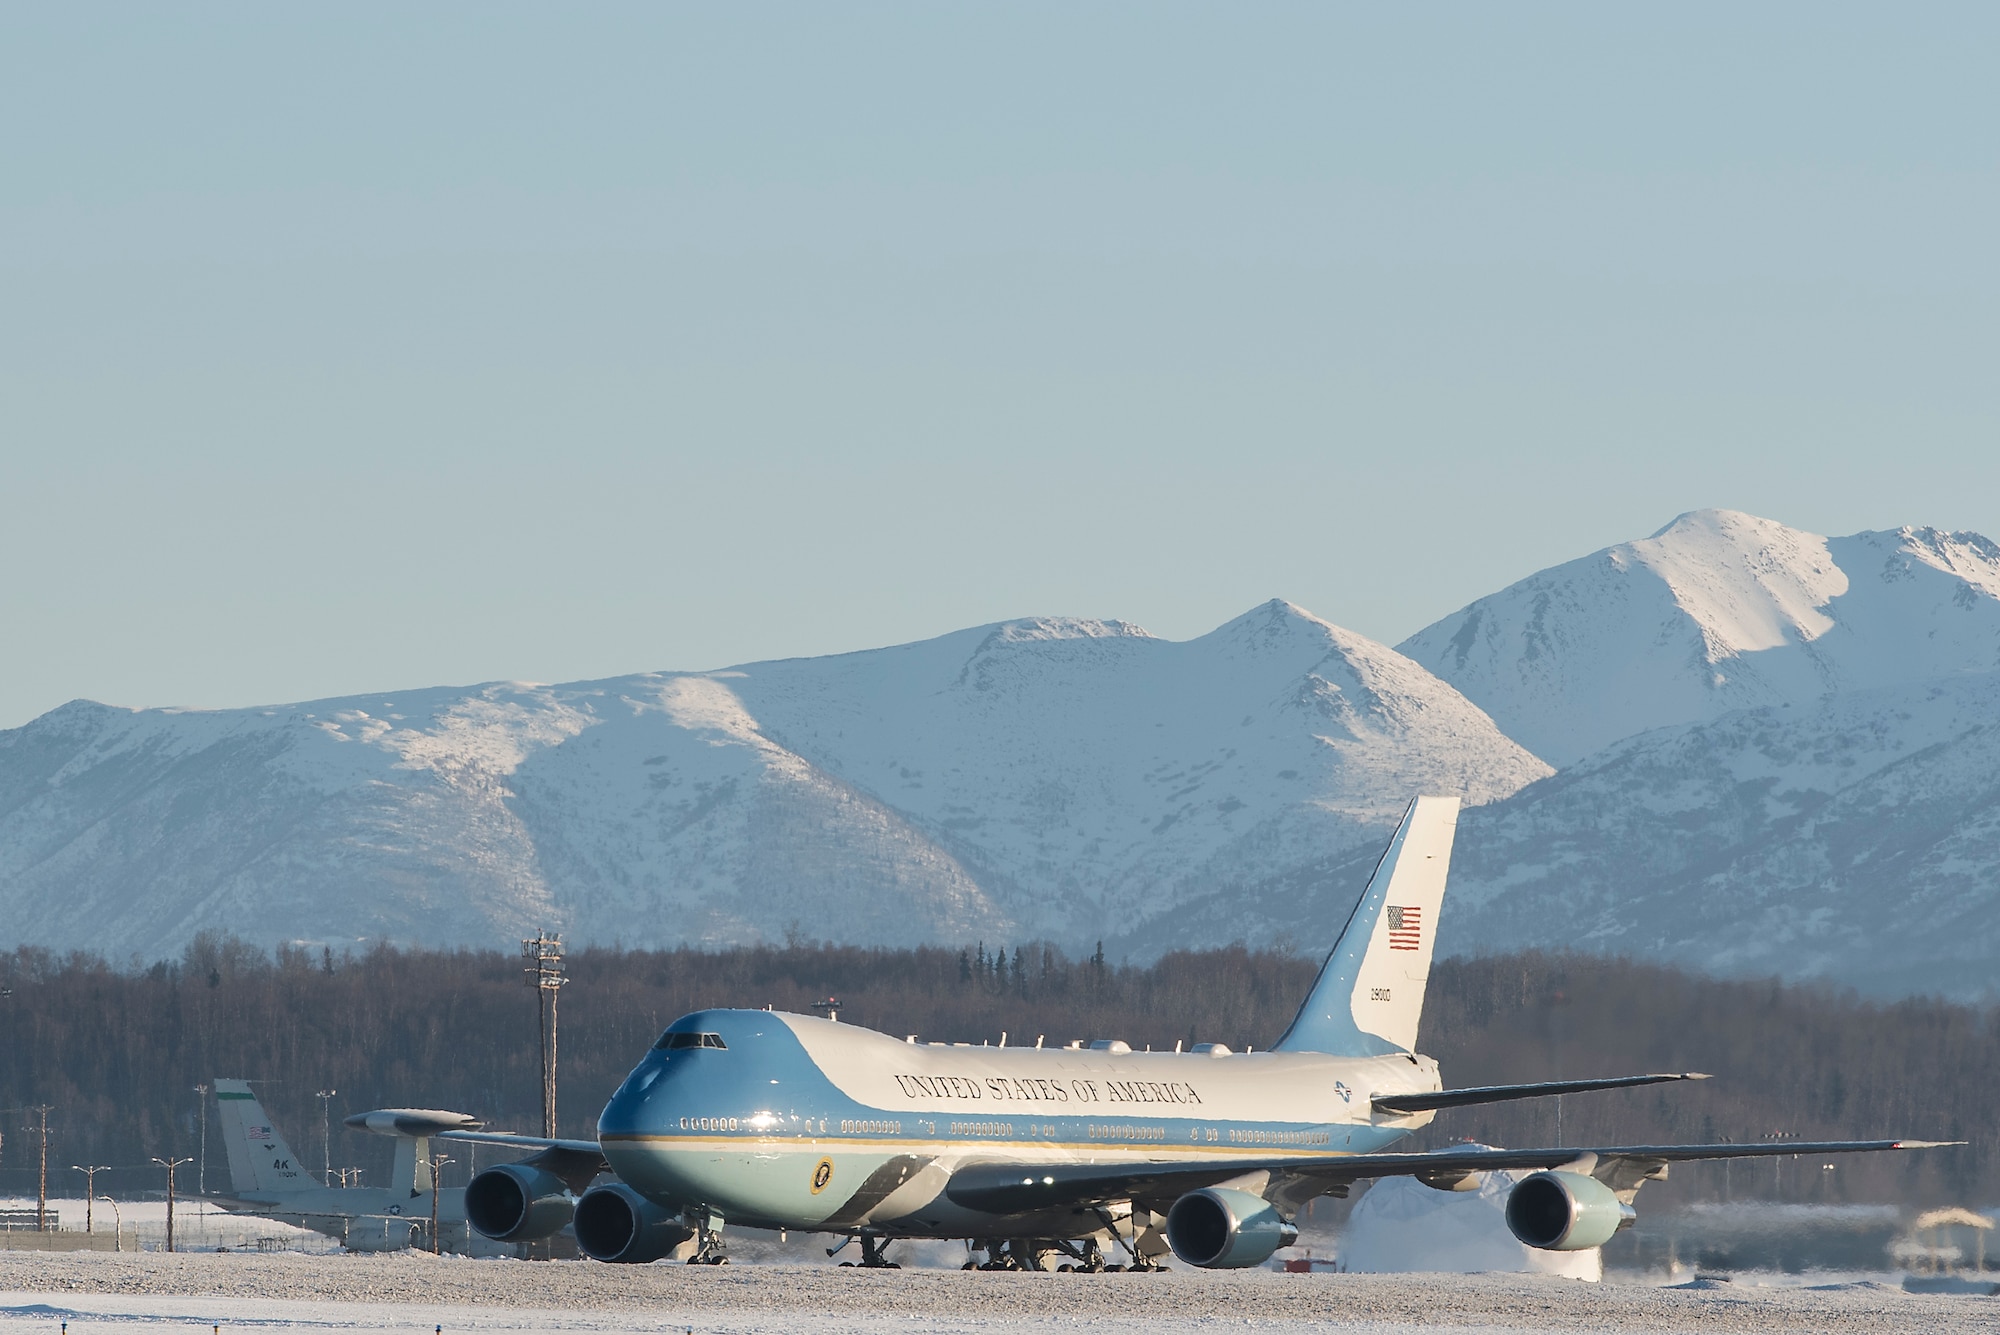 Air Force One taxis to be refueled on Joint Base Elmendorf-Richardson, Alaska, Feb. 28, 2019. The plane, carrying the President of the United States, landed on JBER to refuel after returning from a two-day summit in Hanoi, Vietnam.